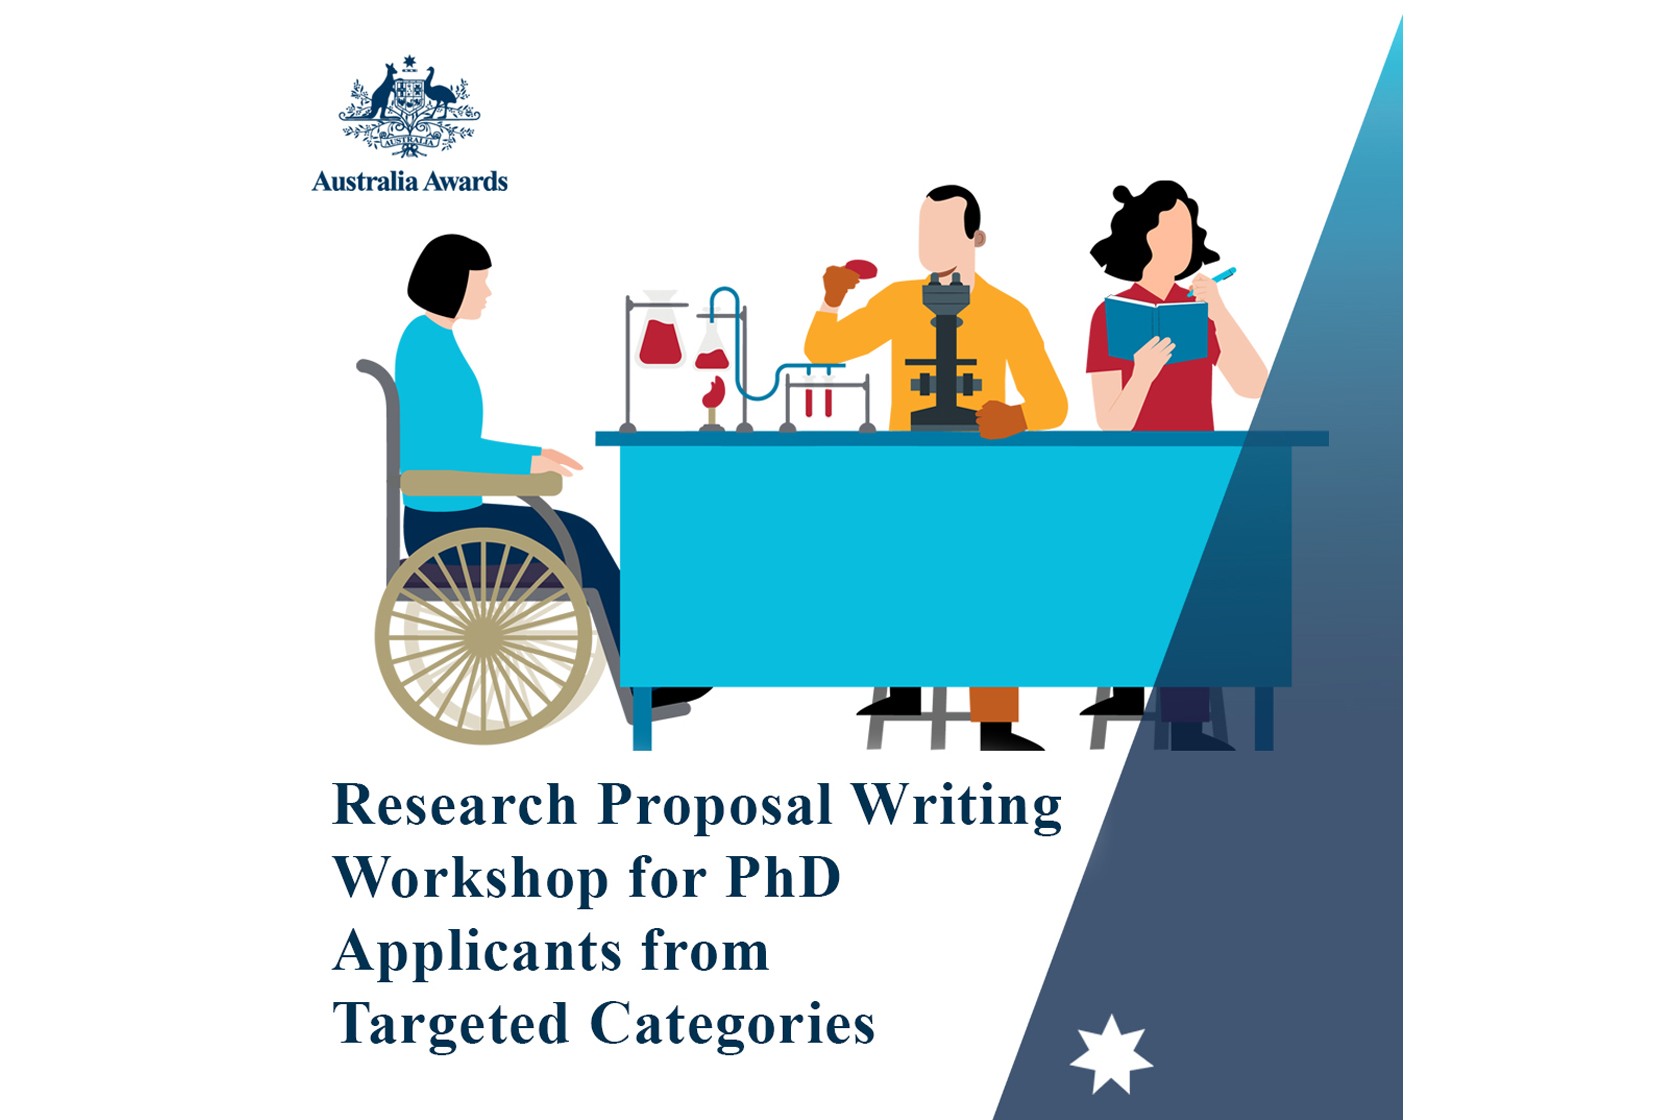 Applications Open for Research Proposal Writing Workshop!